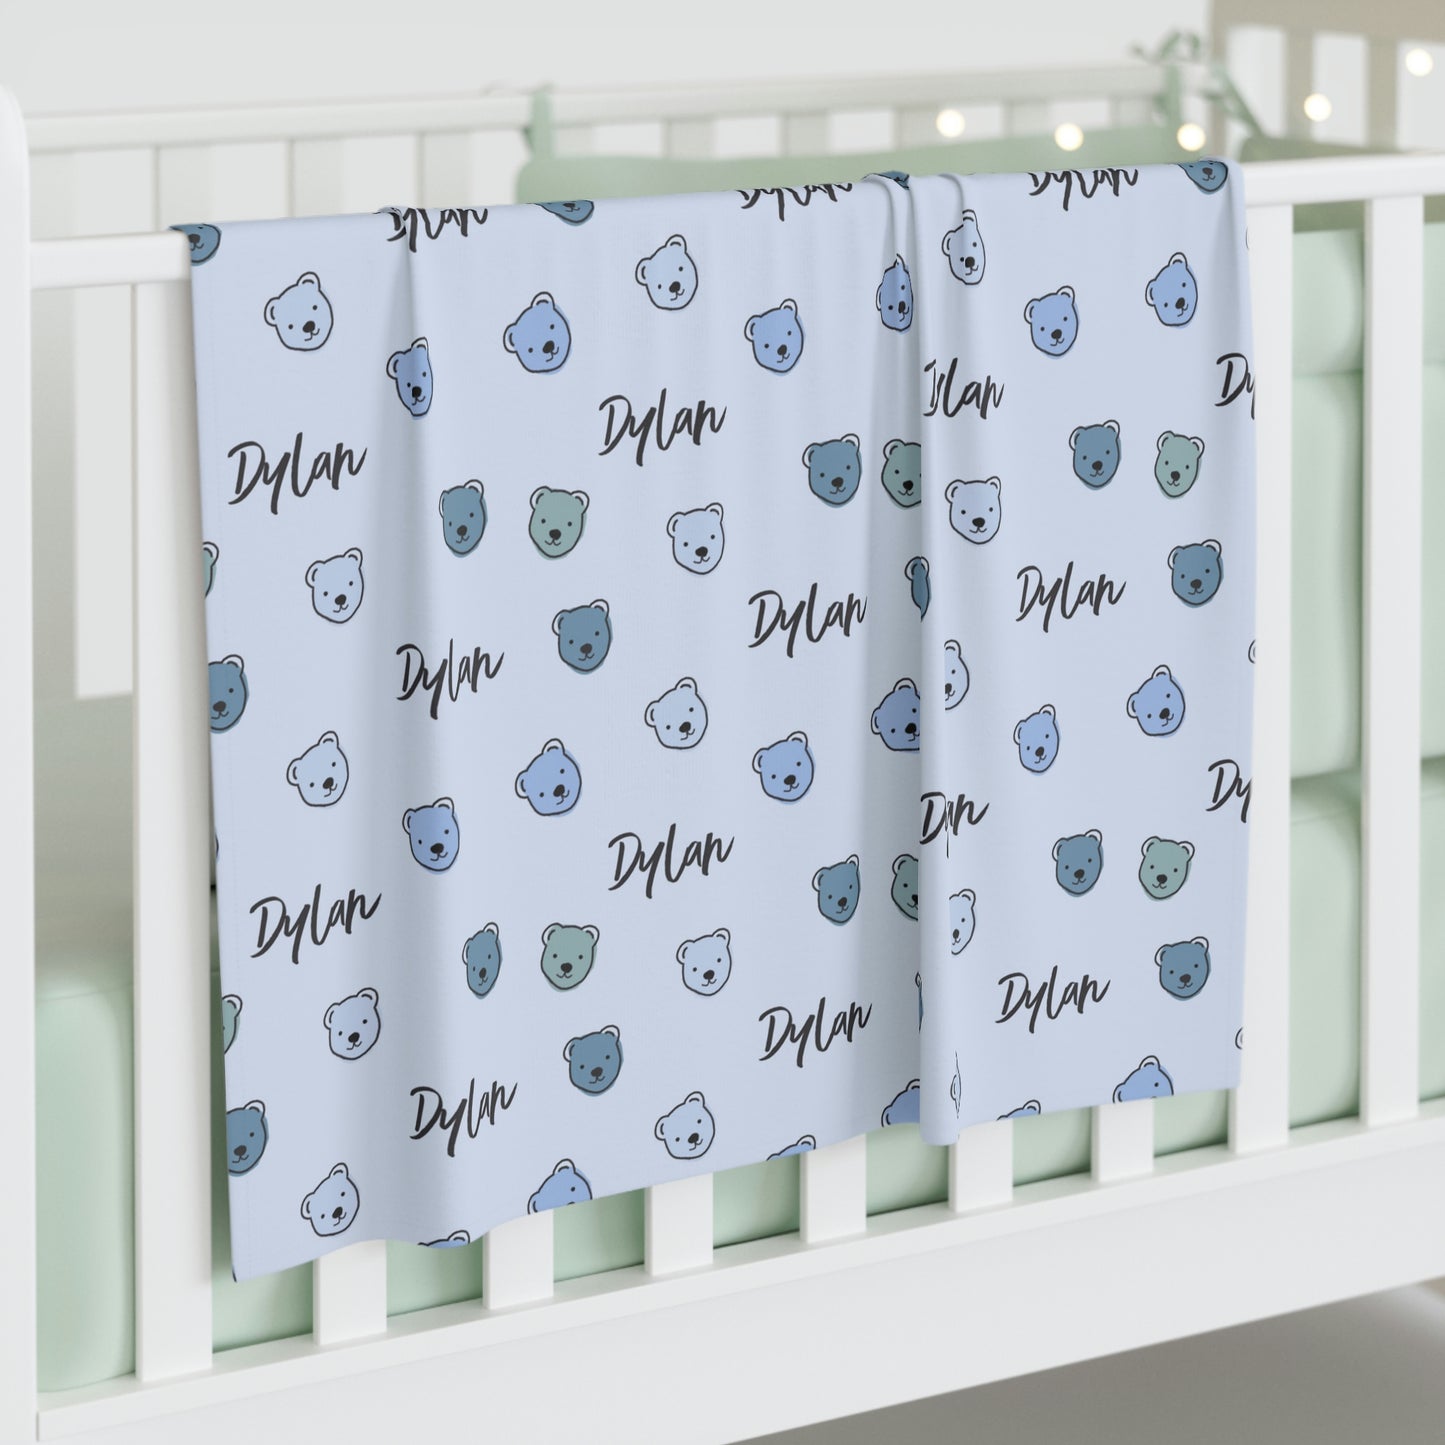 Jersey personalized baby blanket in blue cuddly bear pattern hung over side of white crib